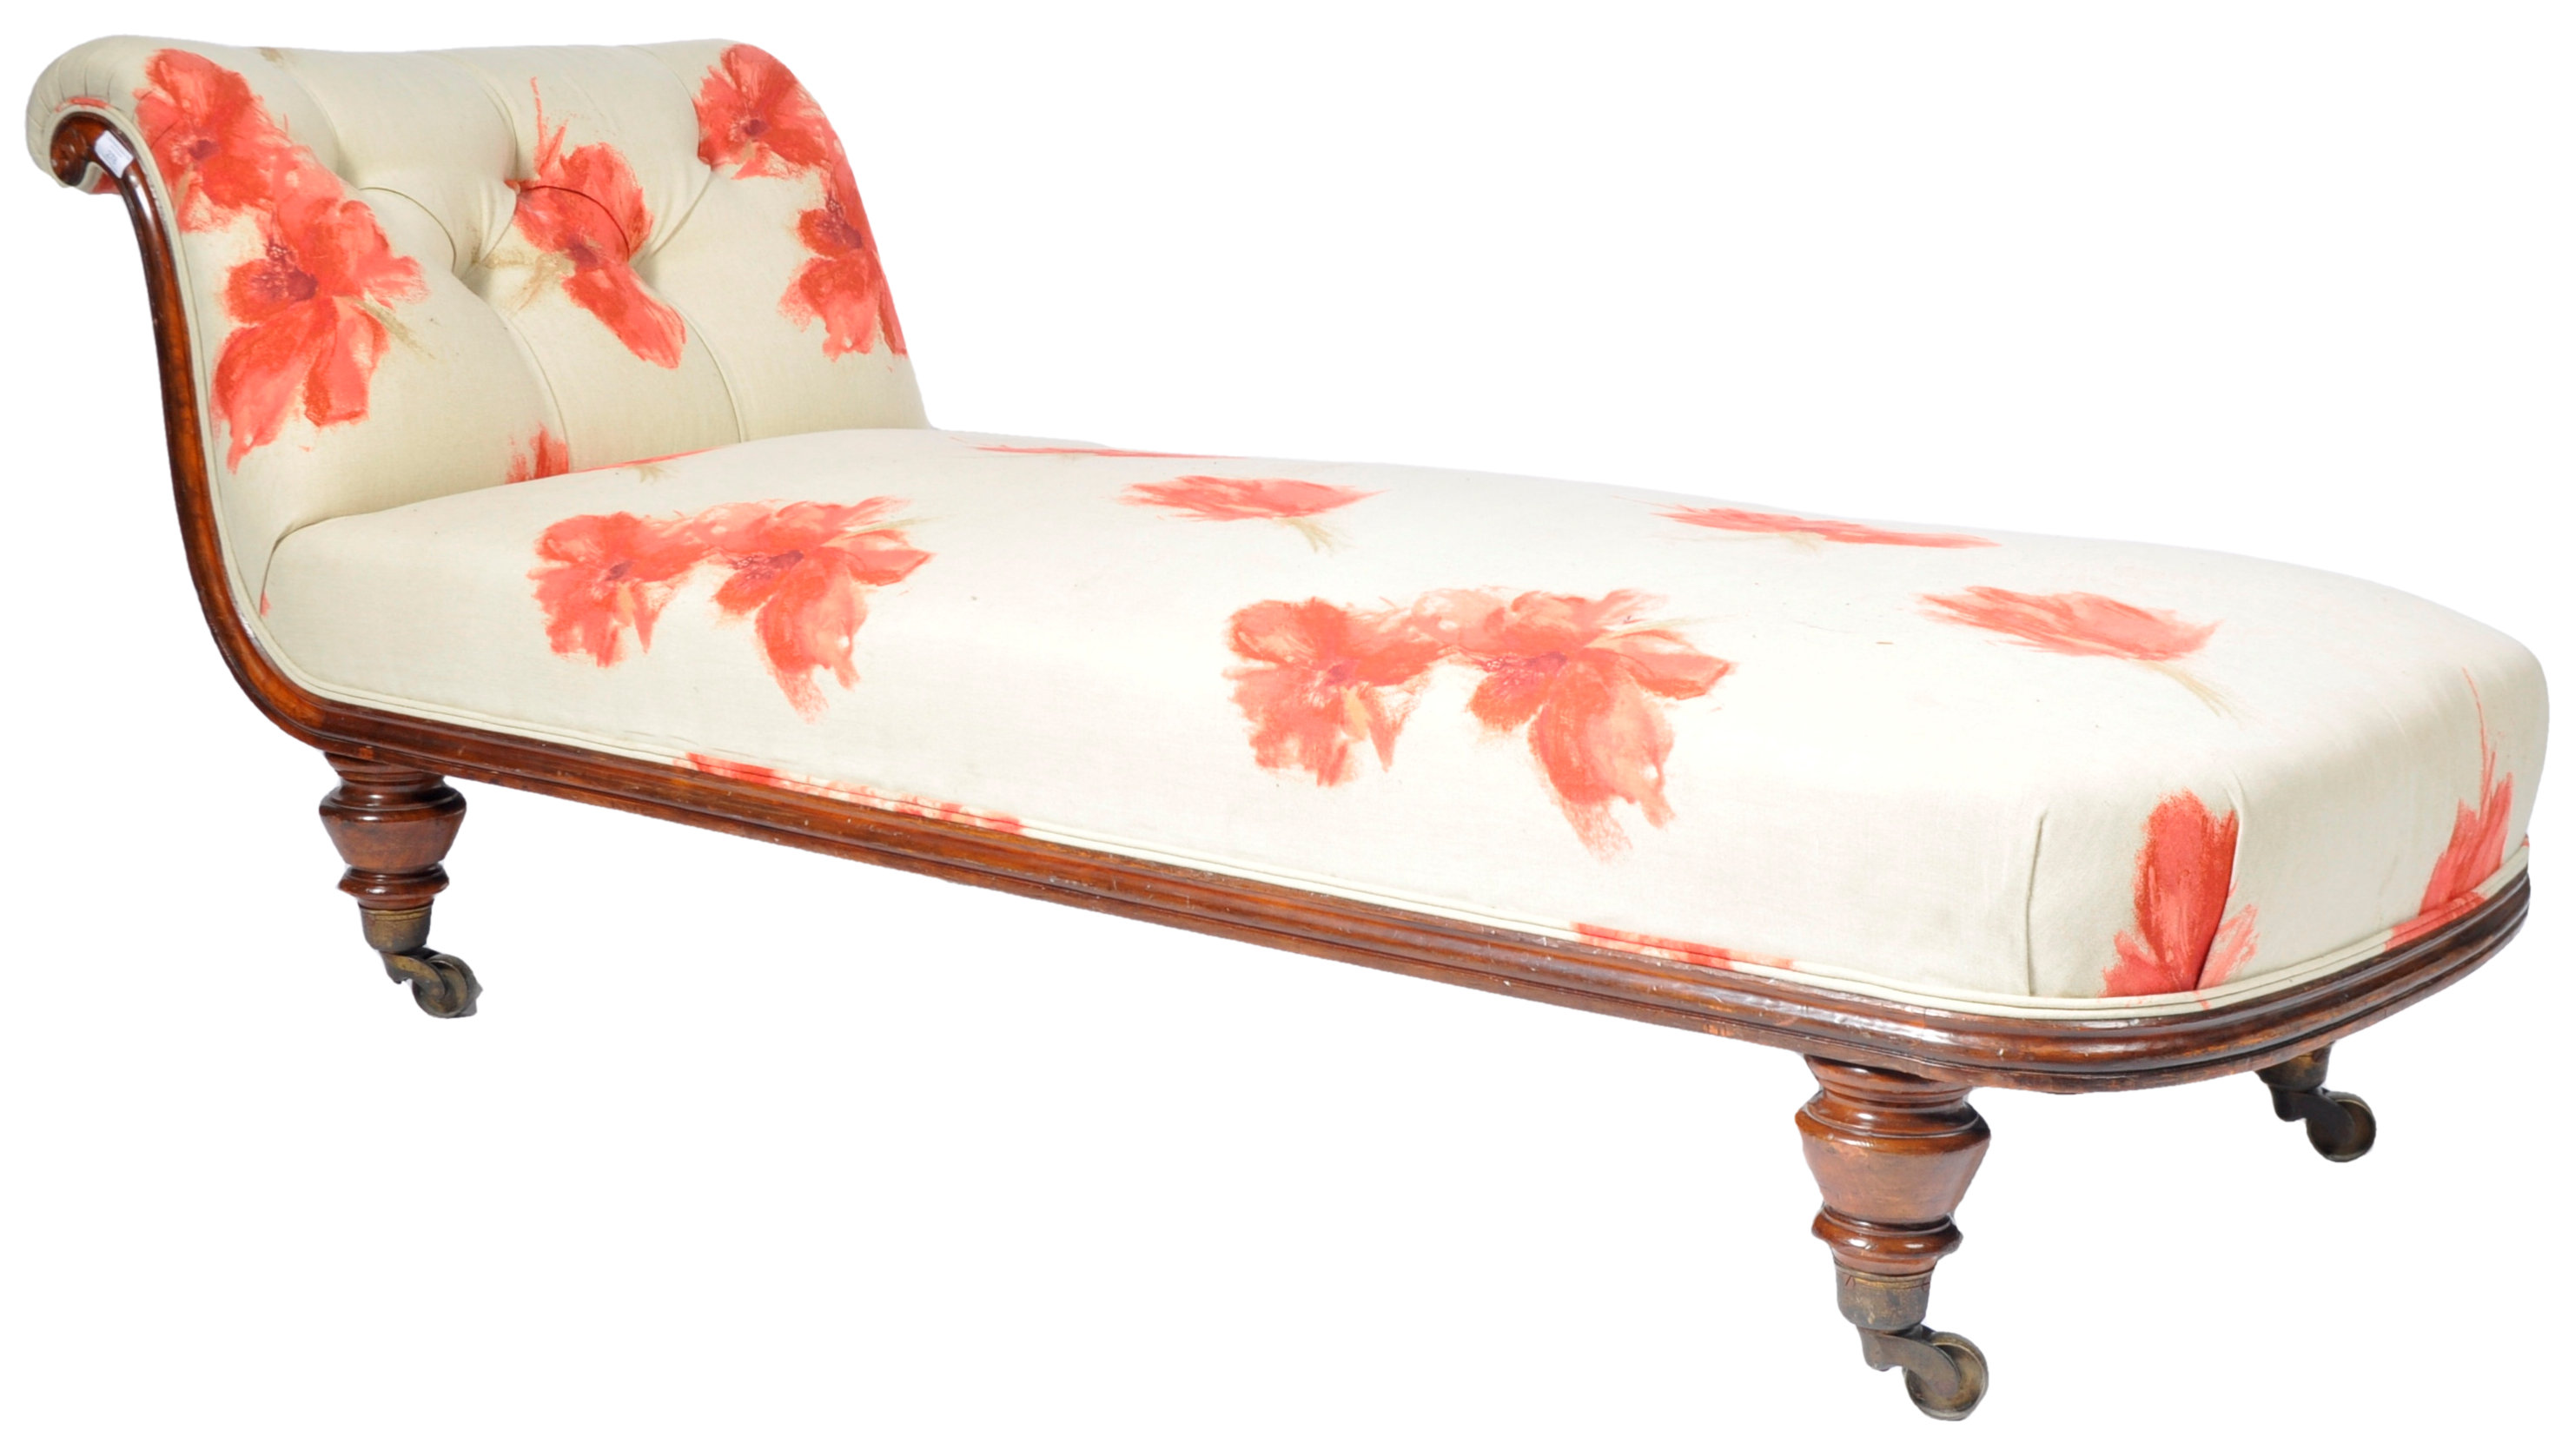 19TH CENTURY VICTORIAN MAHOGANY CHAISE LOUNGE DAYBED